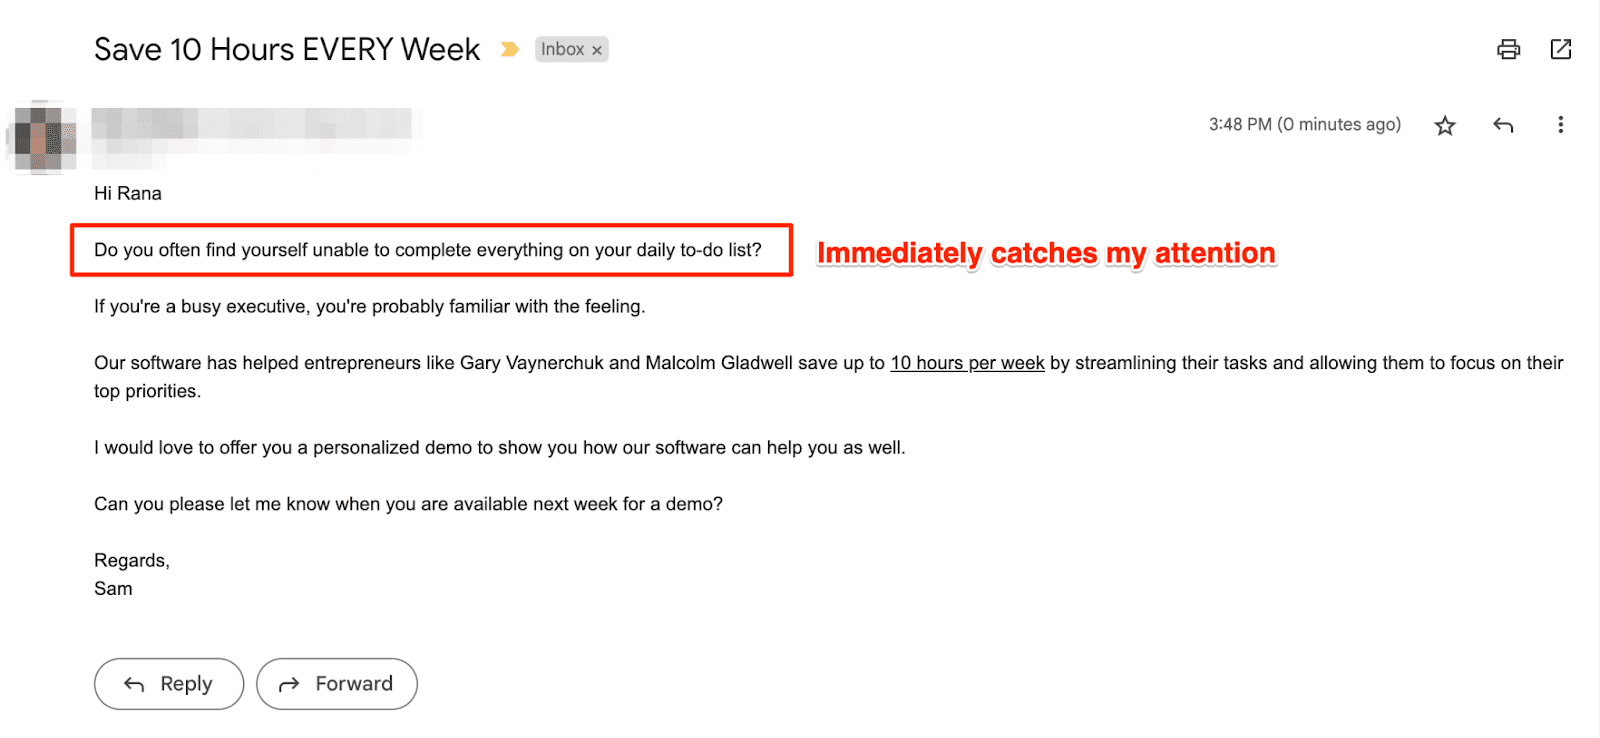 Example of an attention getting email headline 